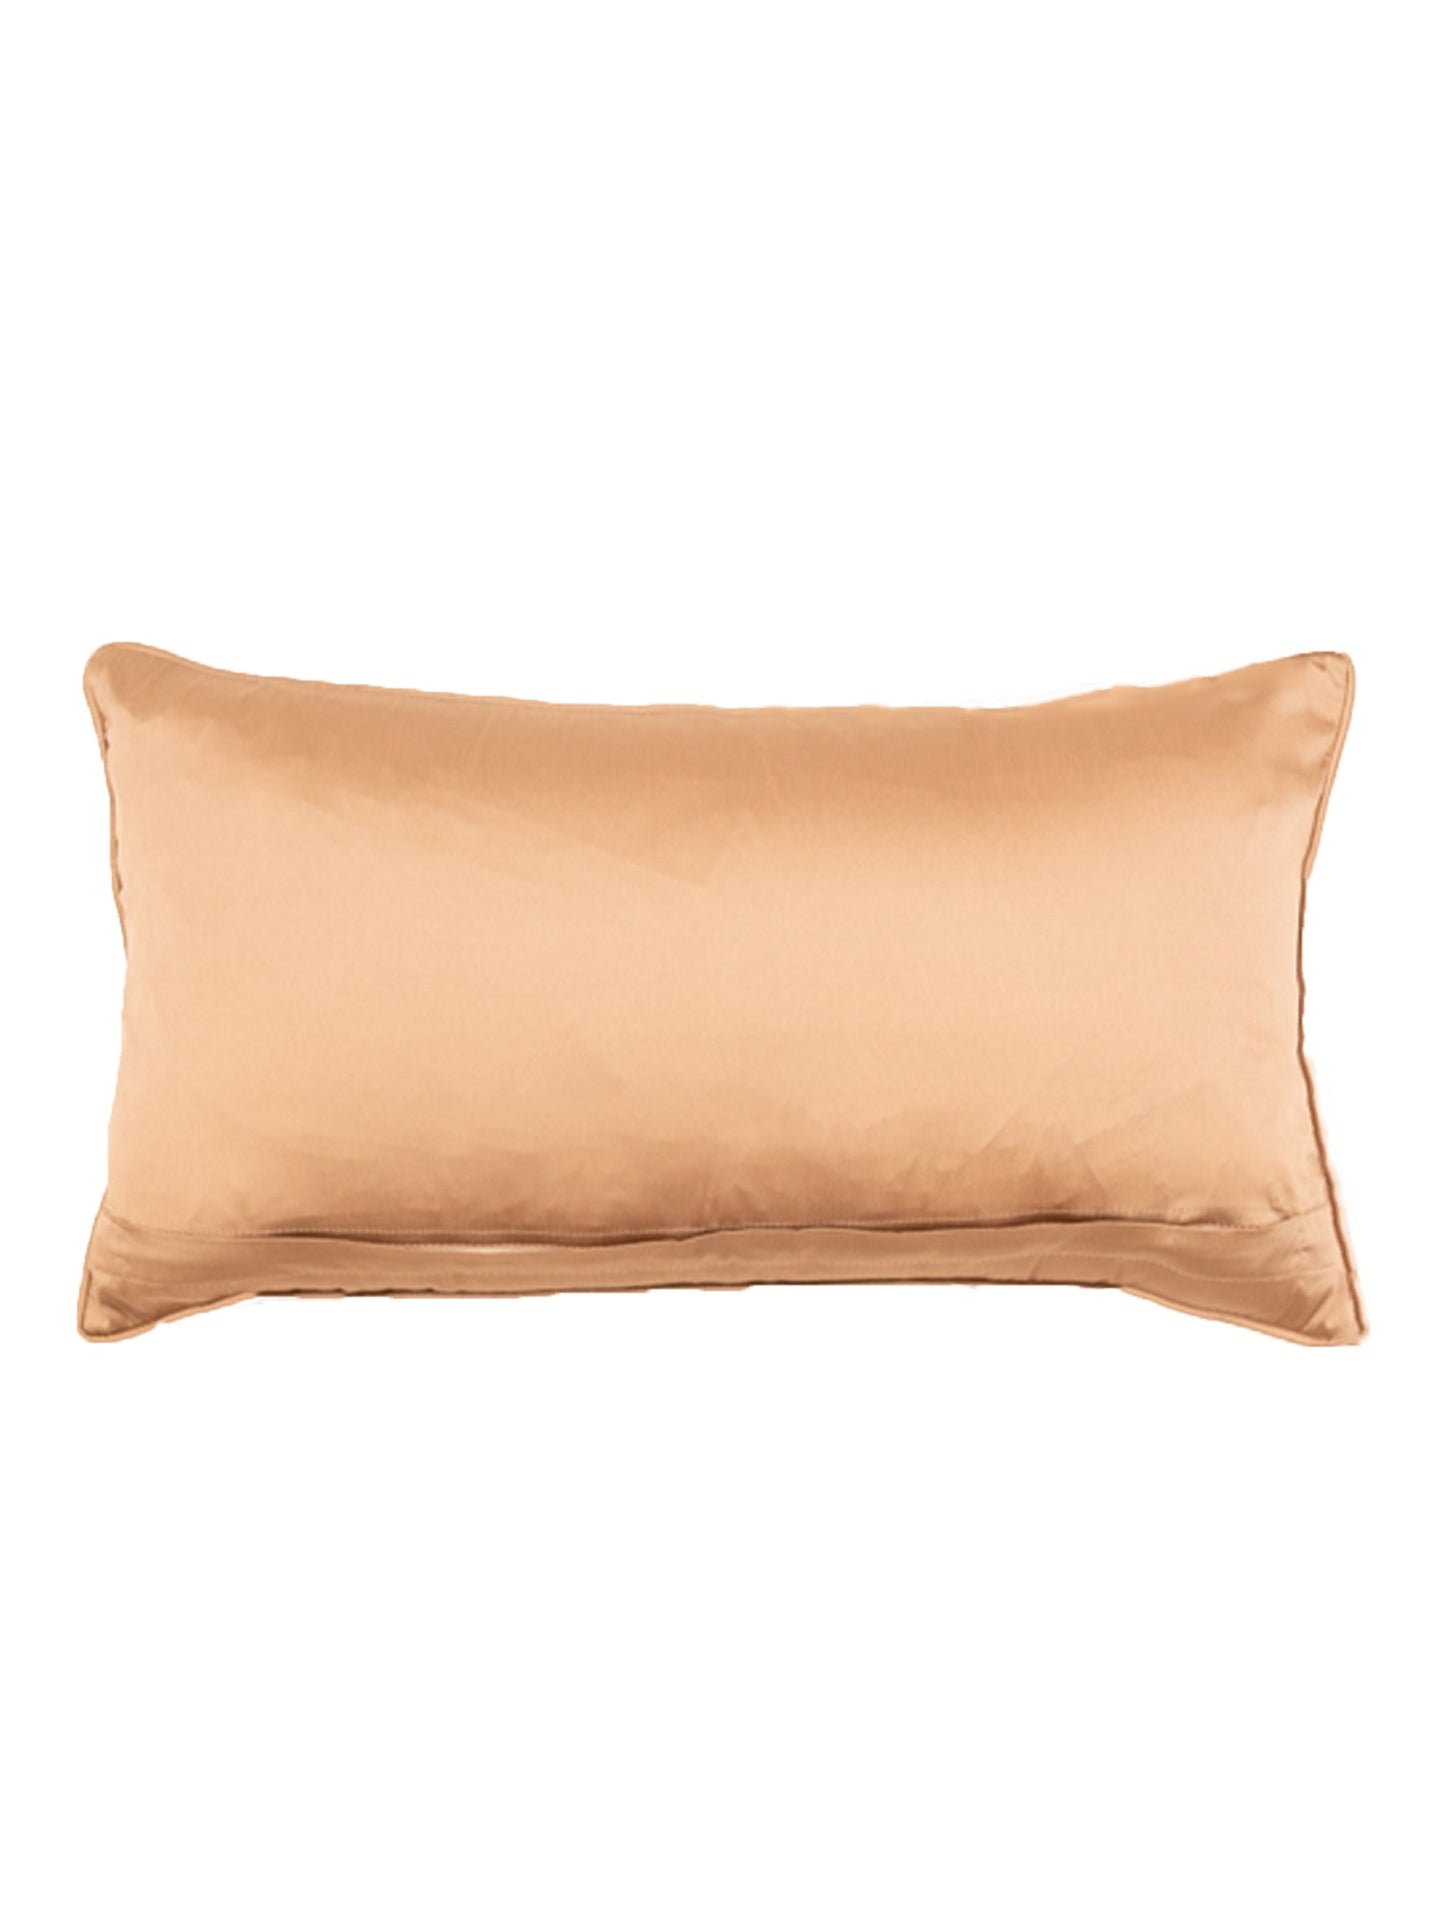 Embroidered Cushion Cover Polyester Brown - 12" X 22"